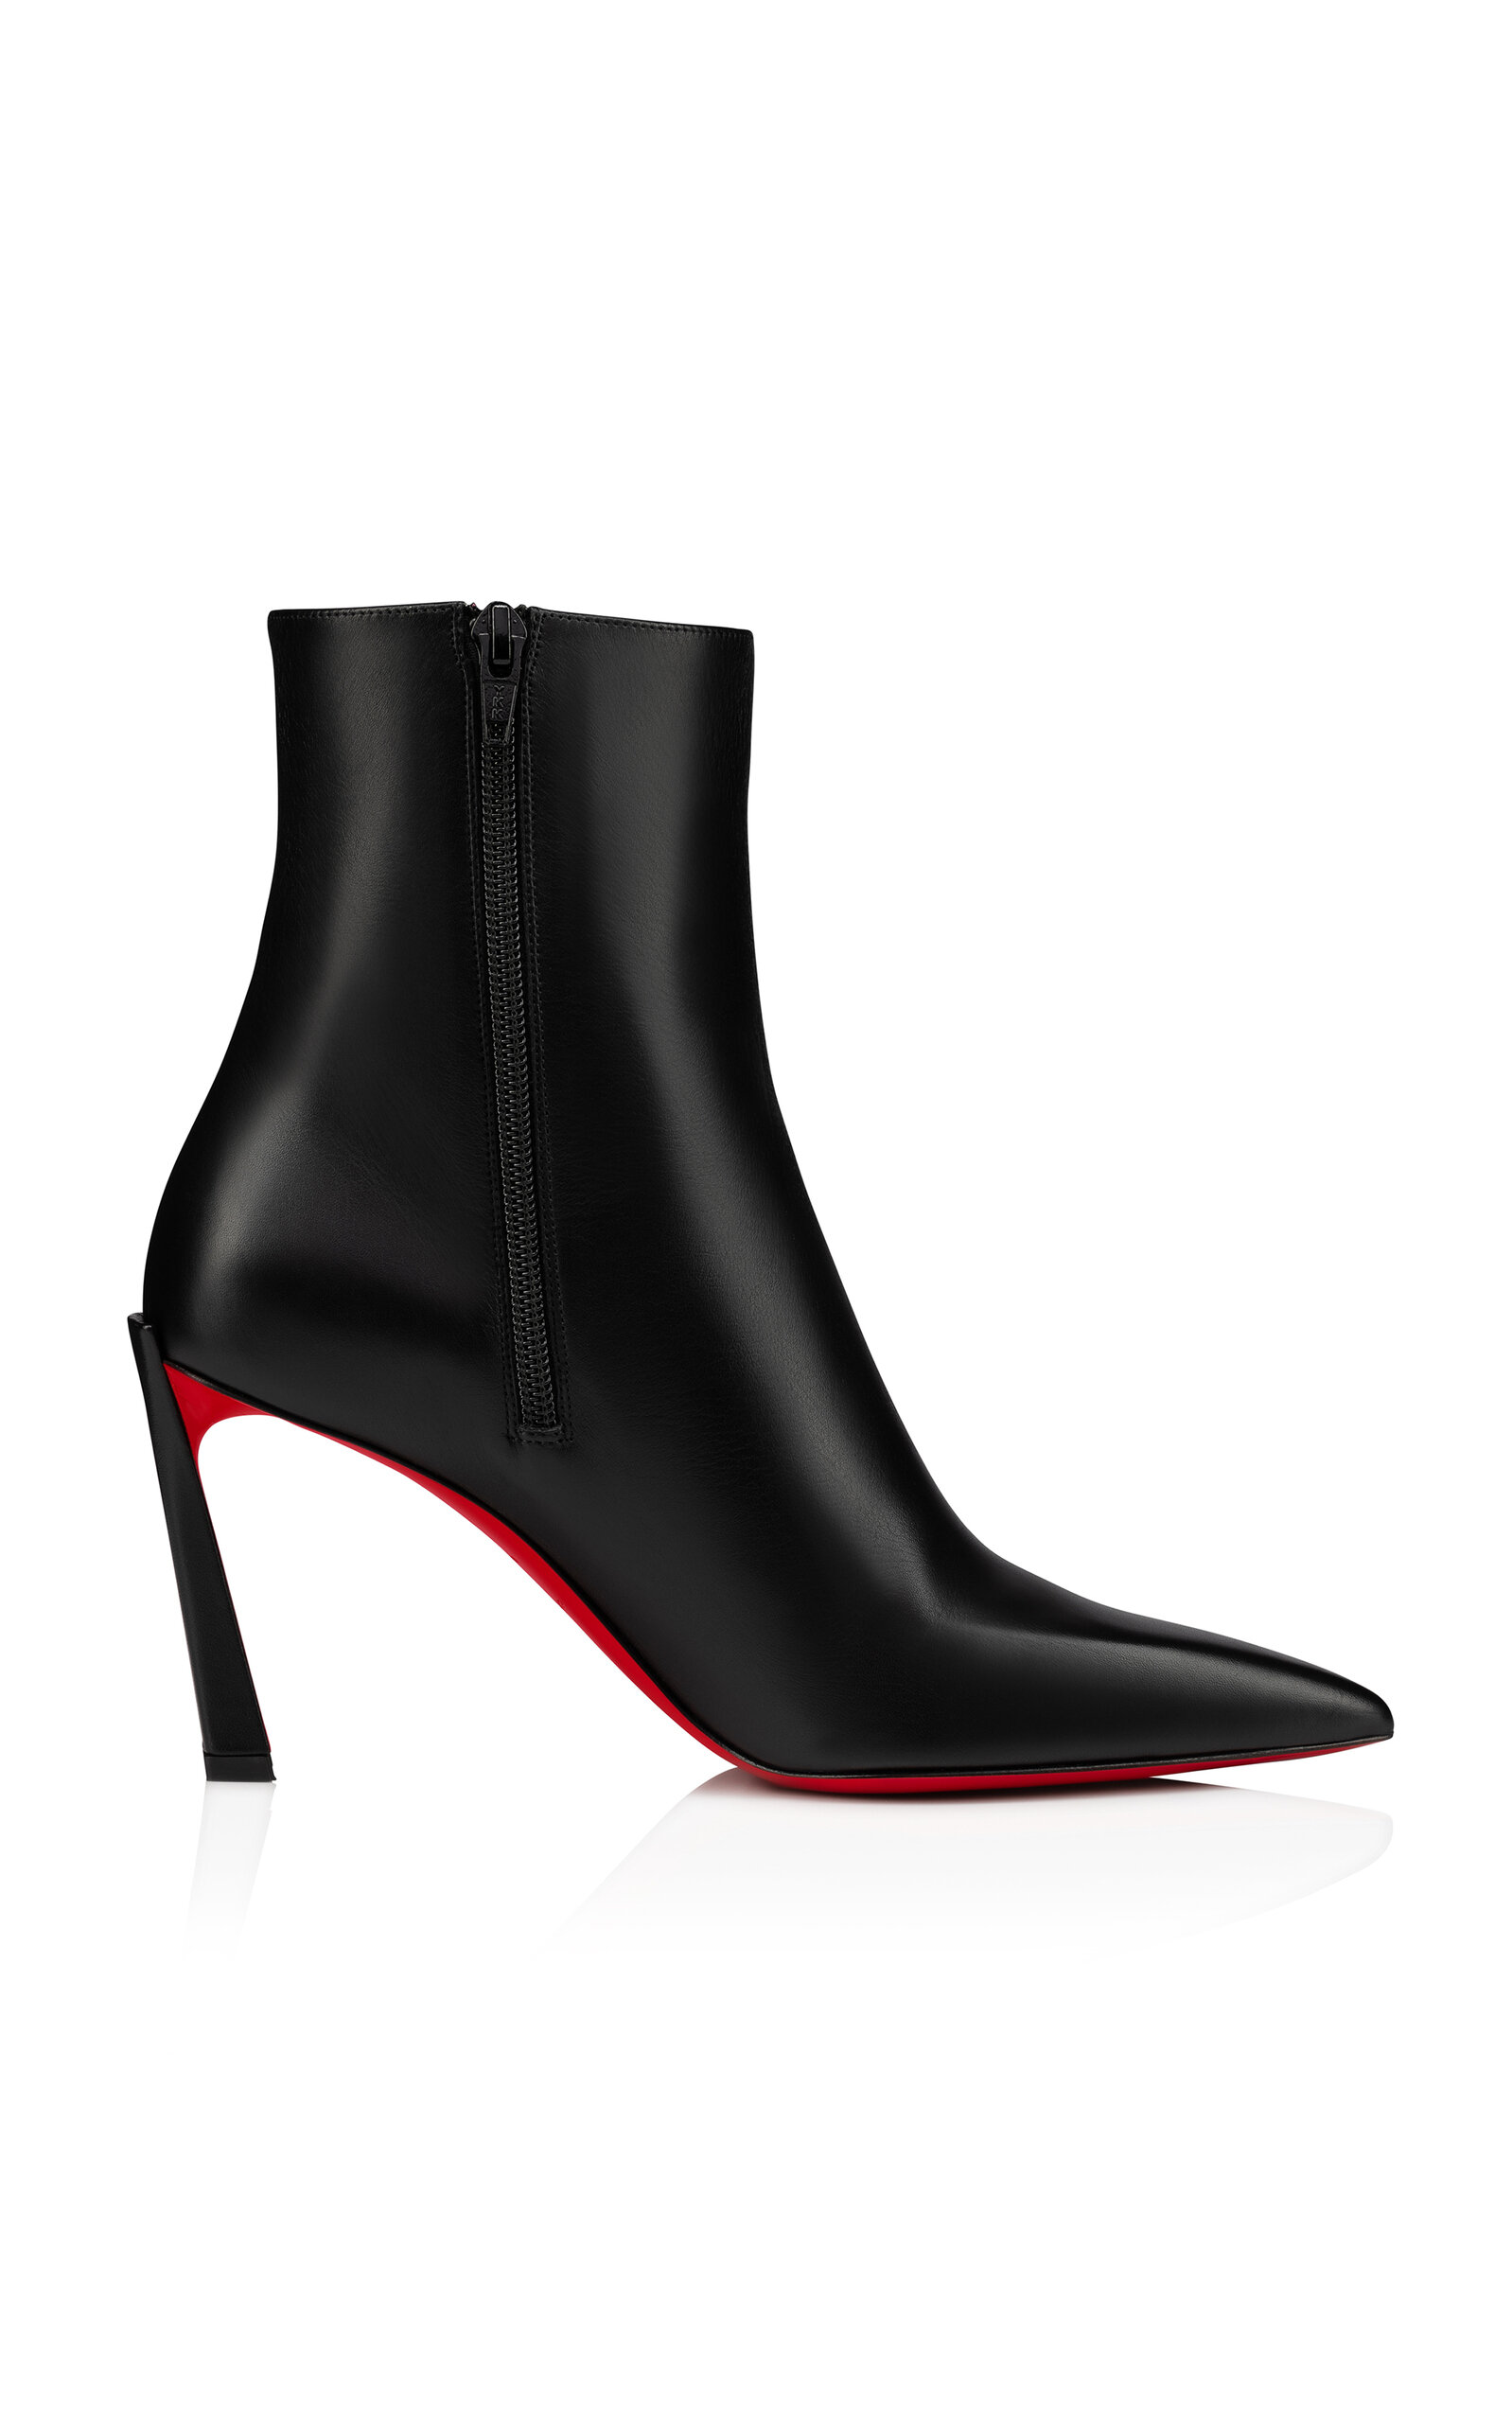 Christian Louboutin Women's Condora 85mm Leather Ankle Boots